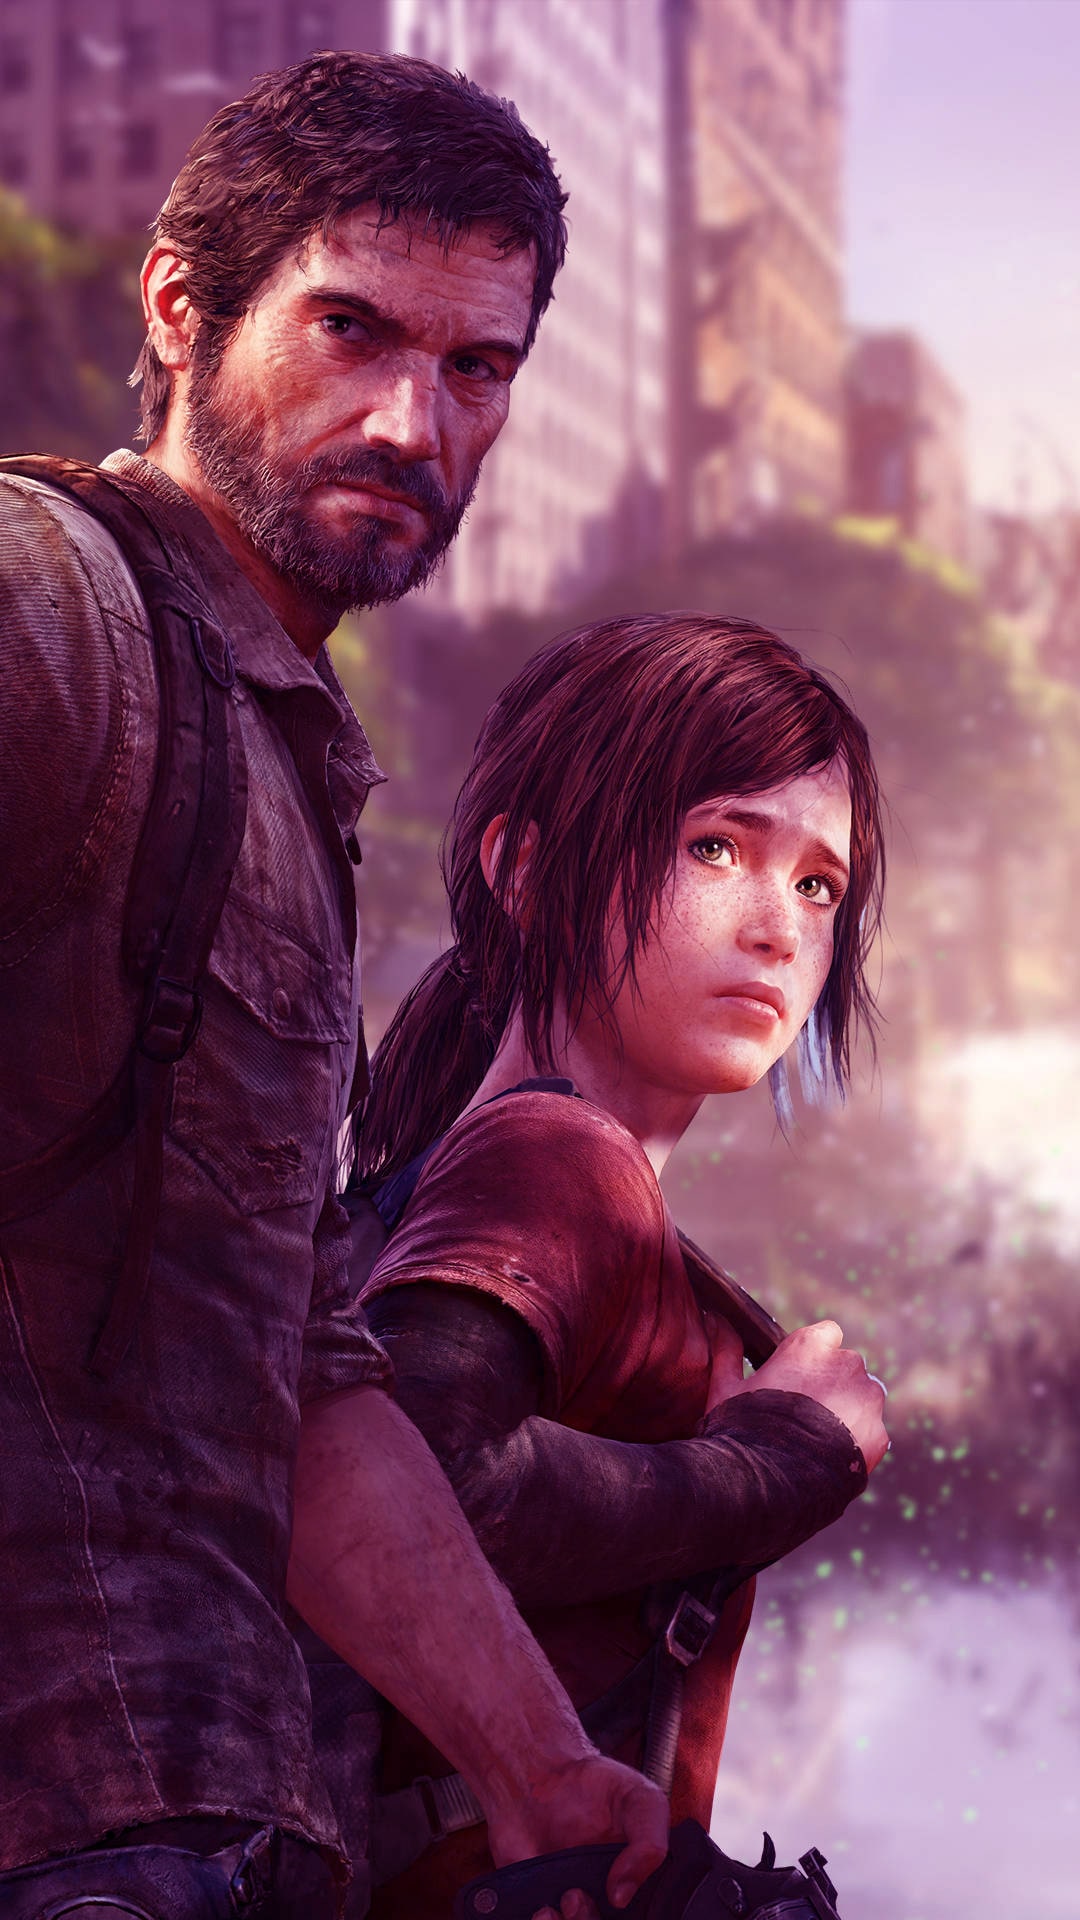 4k the last of us 2020 iPhone Wallpapers Free Download